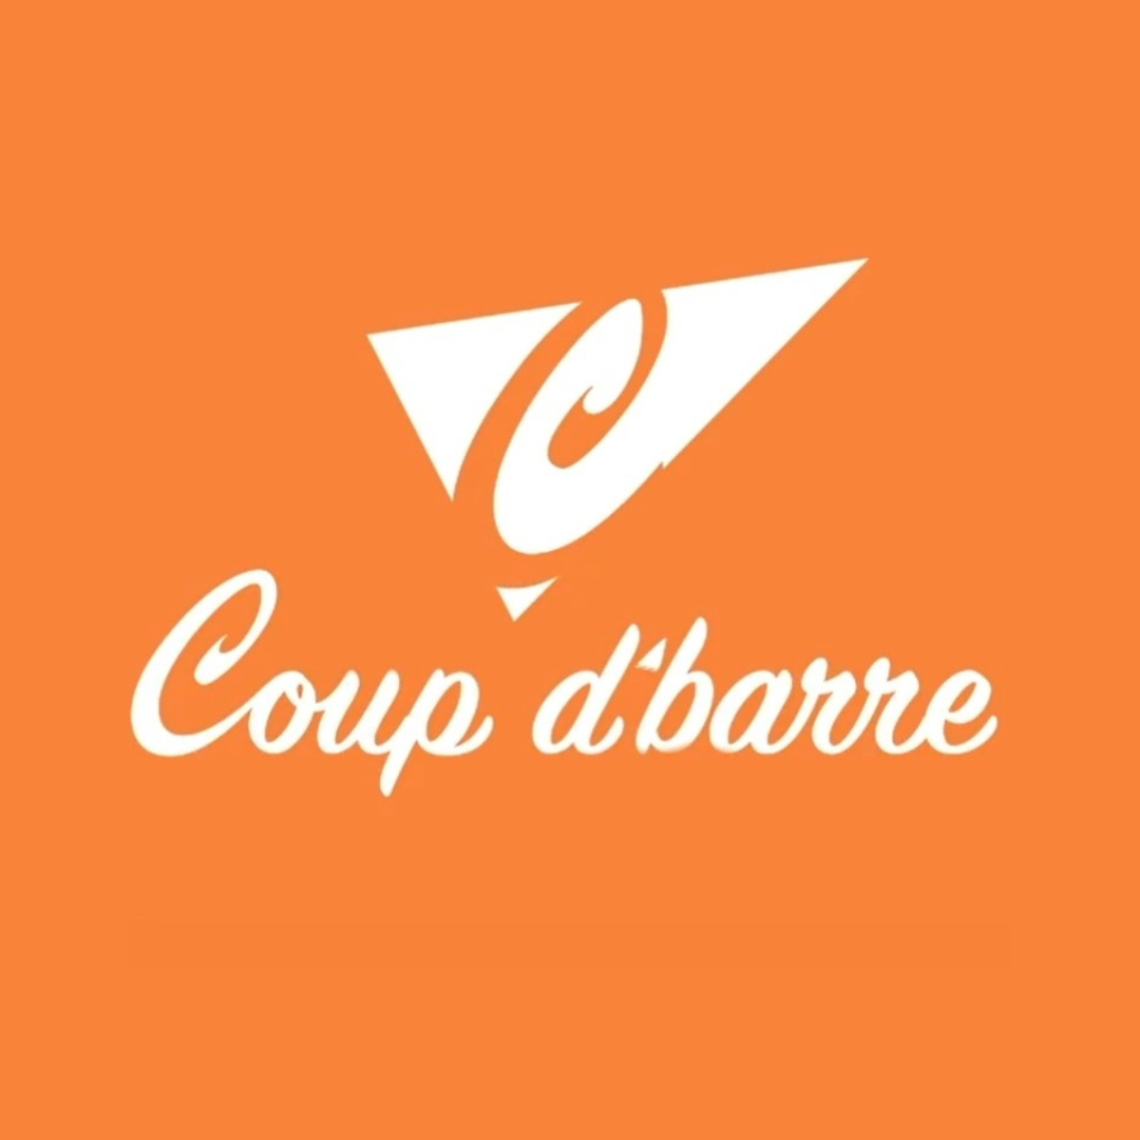 Logo of Coup d'barre